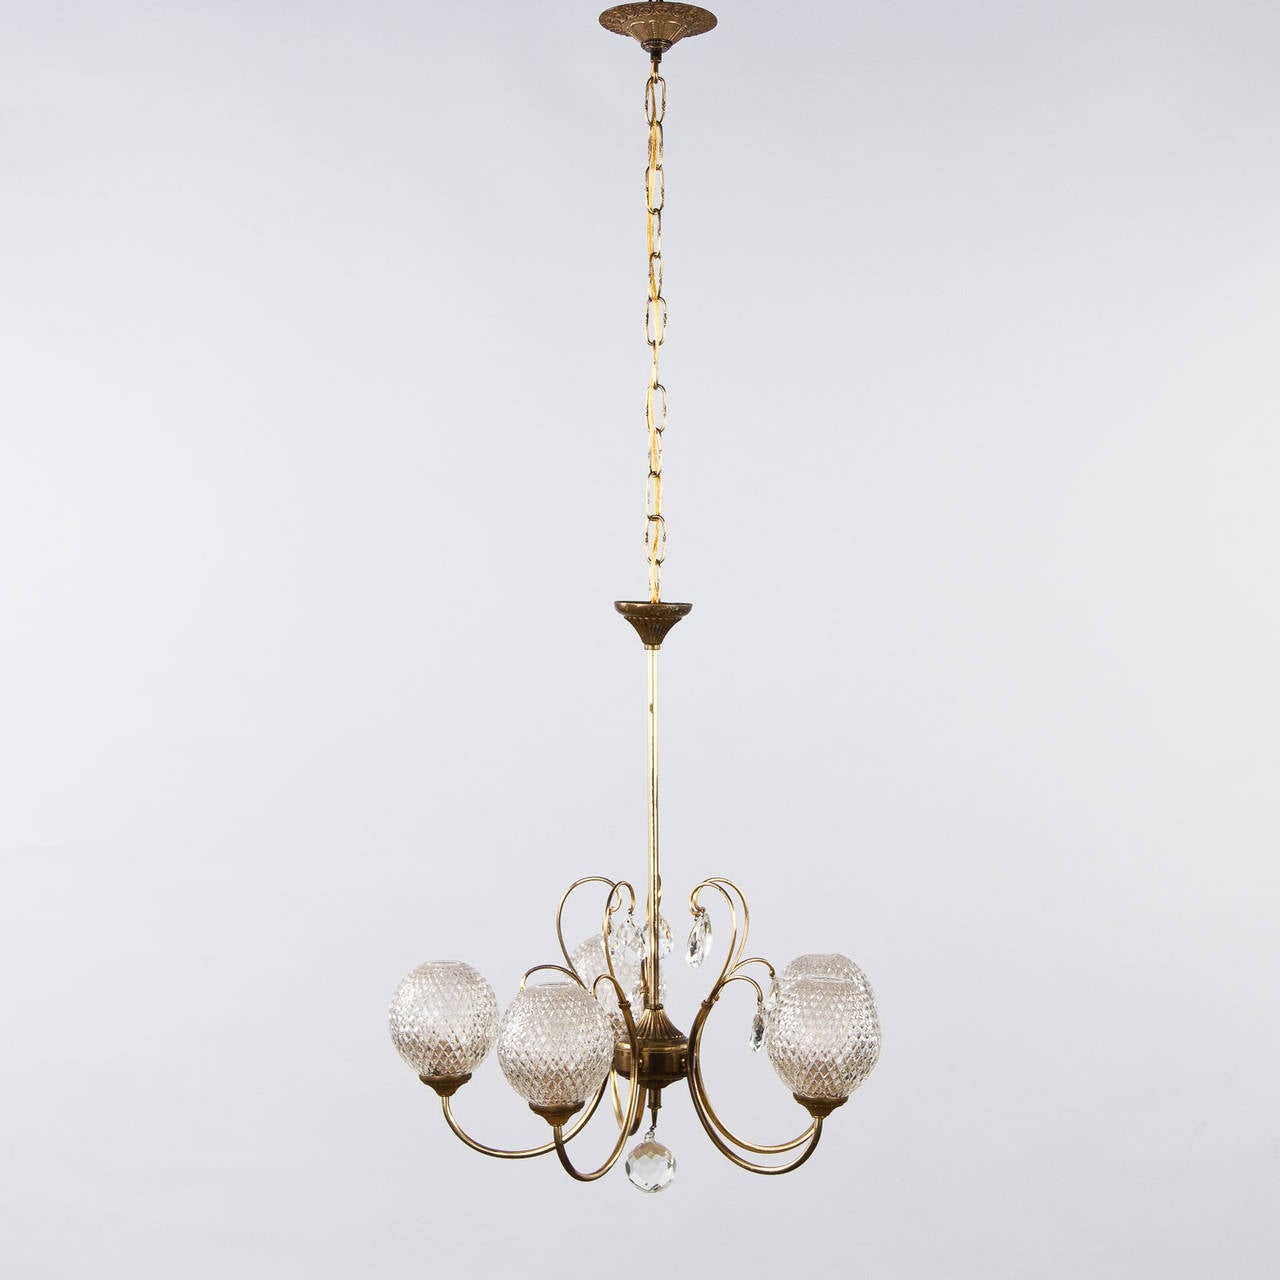 A 1950s French chandelier made of brass with crystal pendants and housing five lights inside etched glass globes. The new adjustable chain and canopy add 23